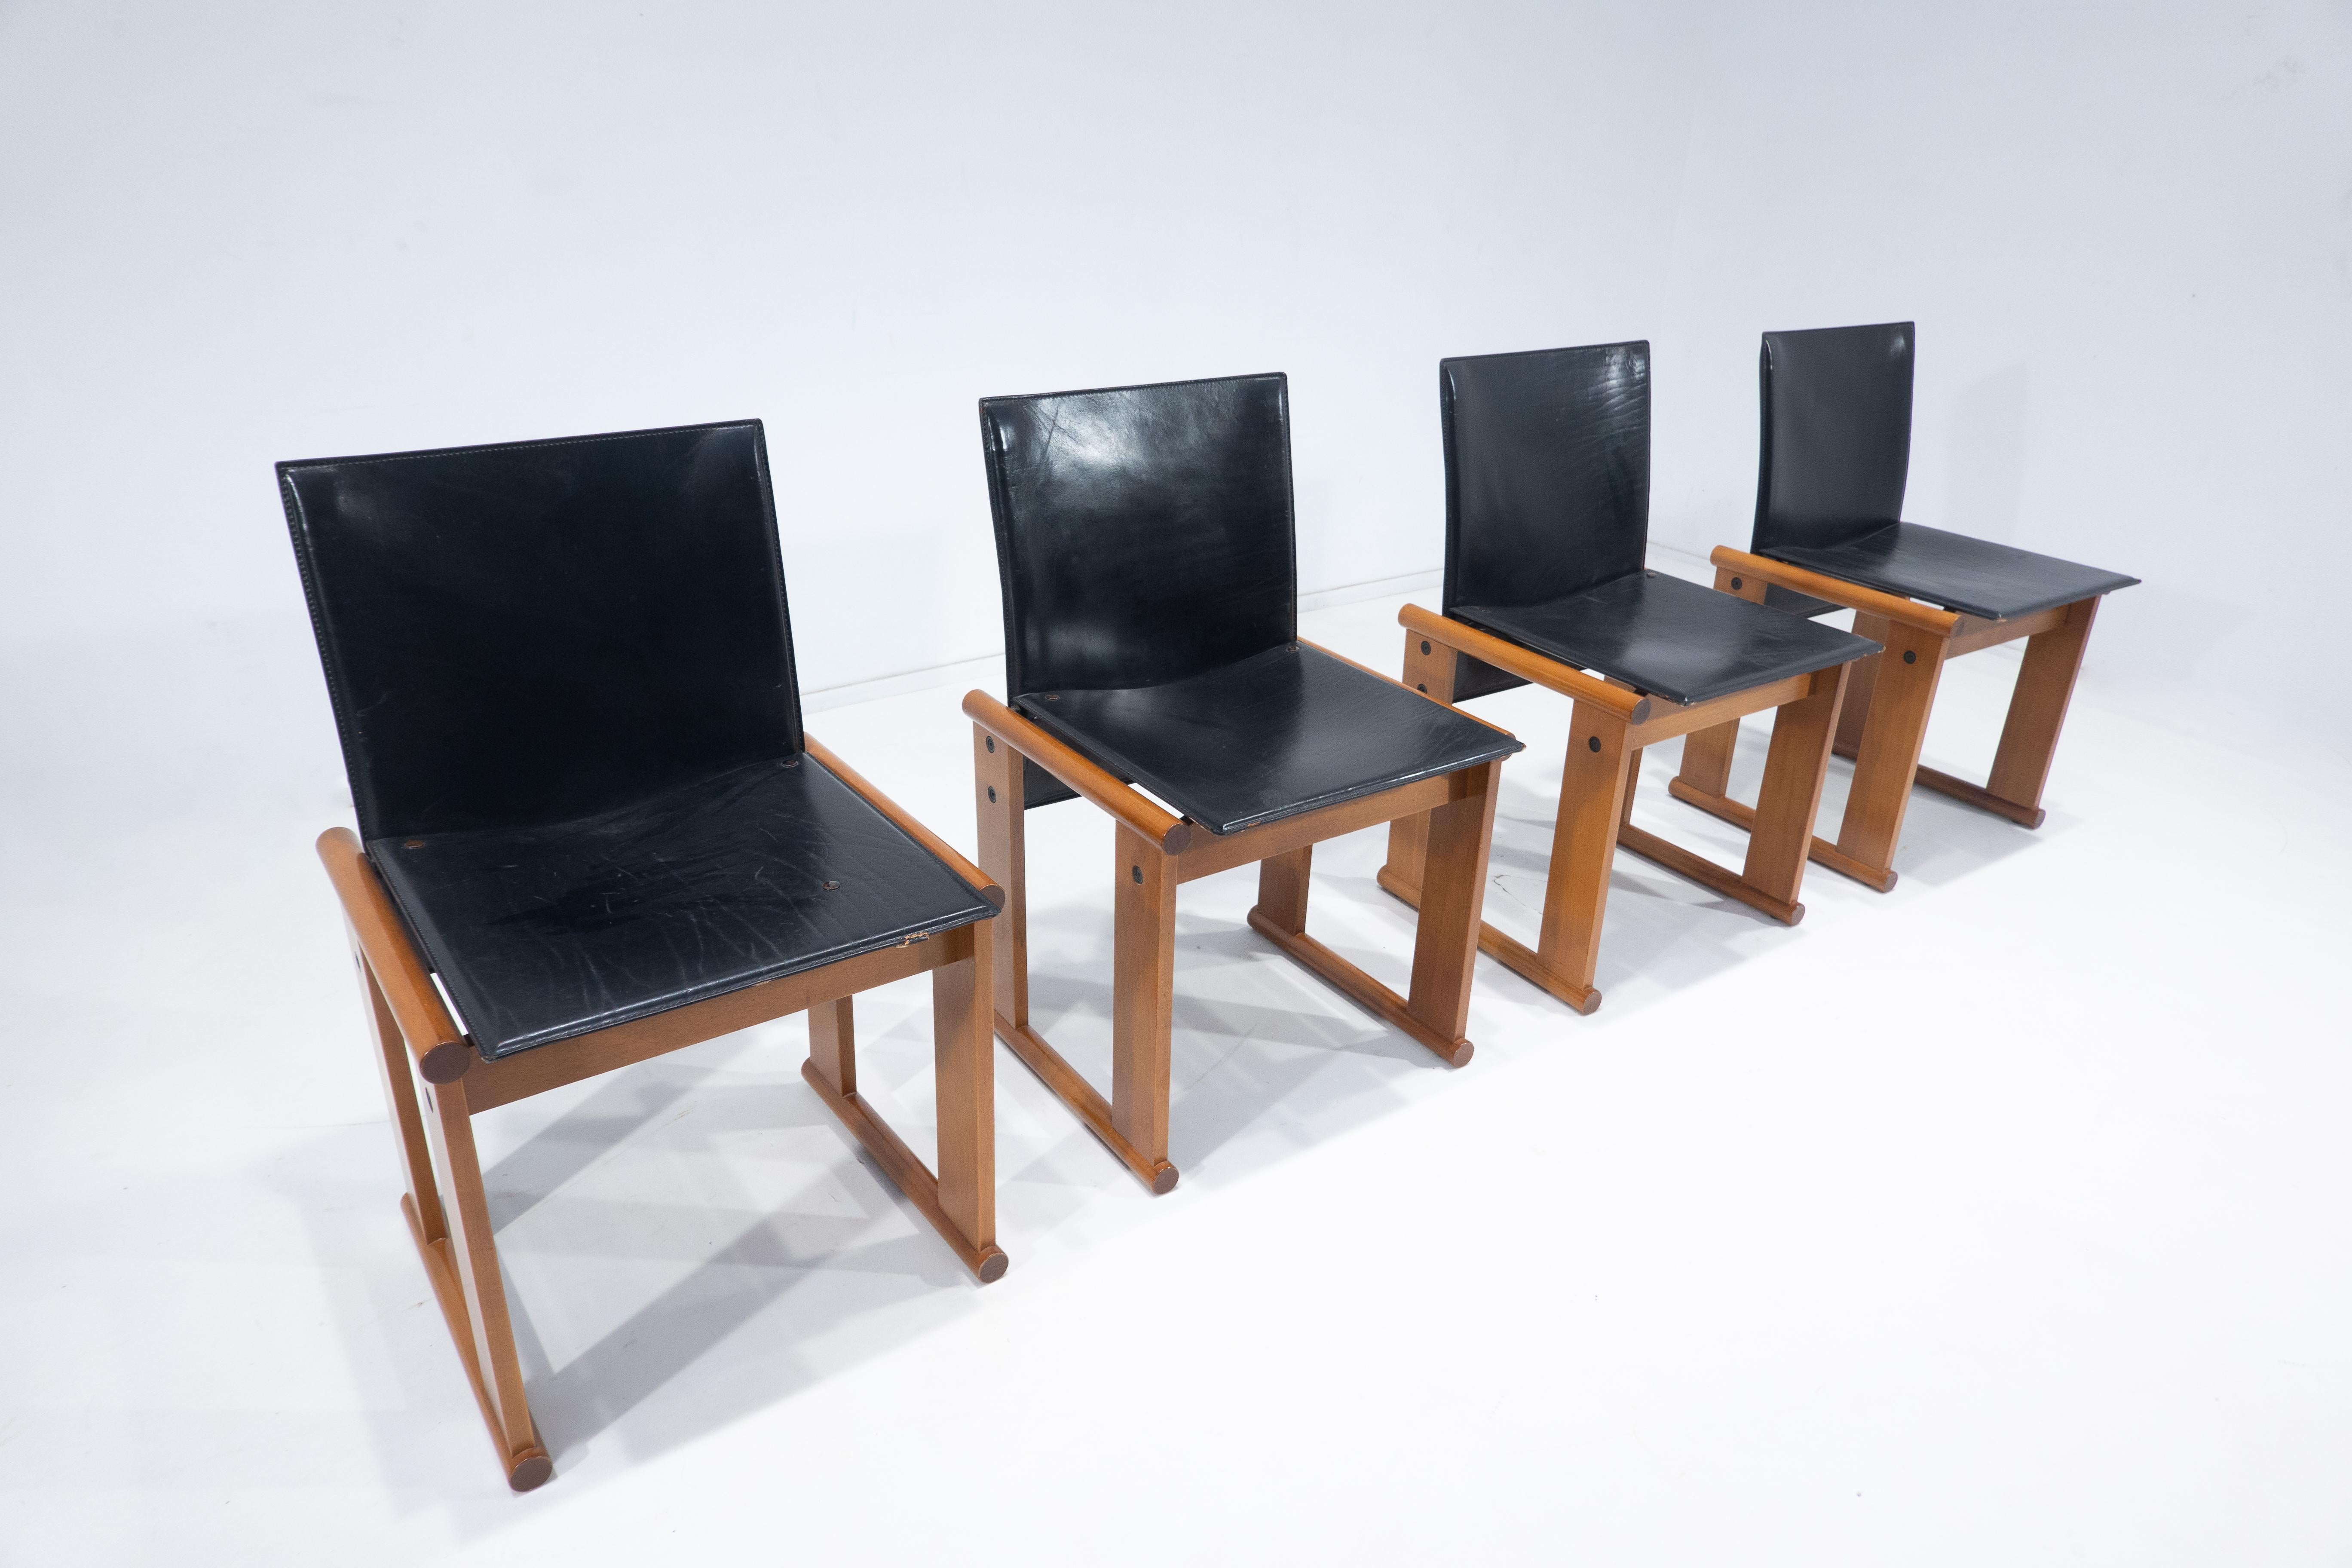 Mid-Century Modern set of 4 chairs by Afra and Tobia Scarpa, Italy, 1960s.